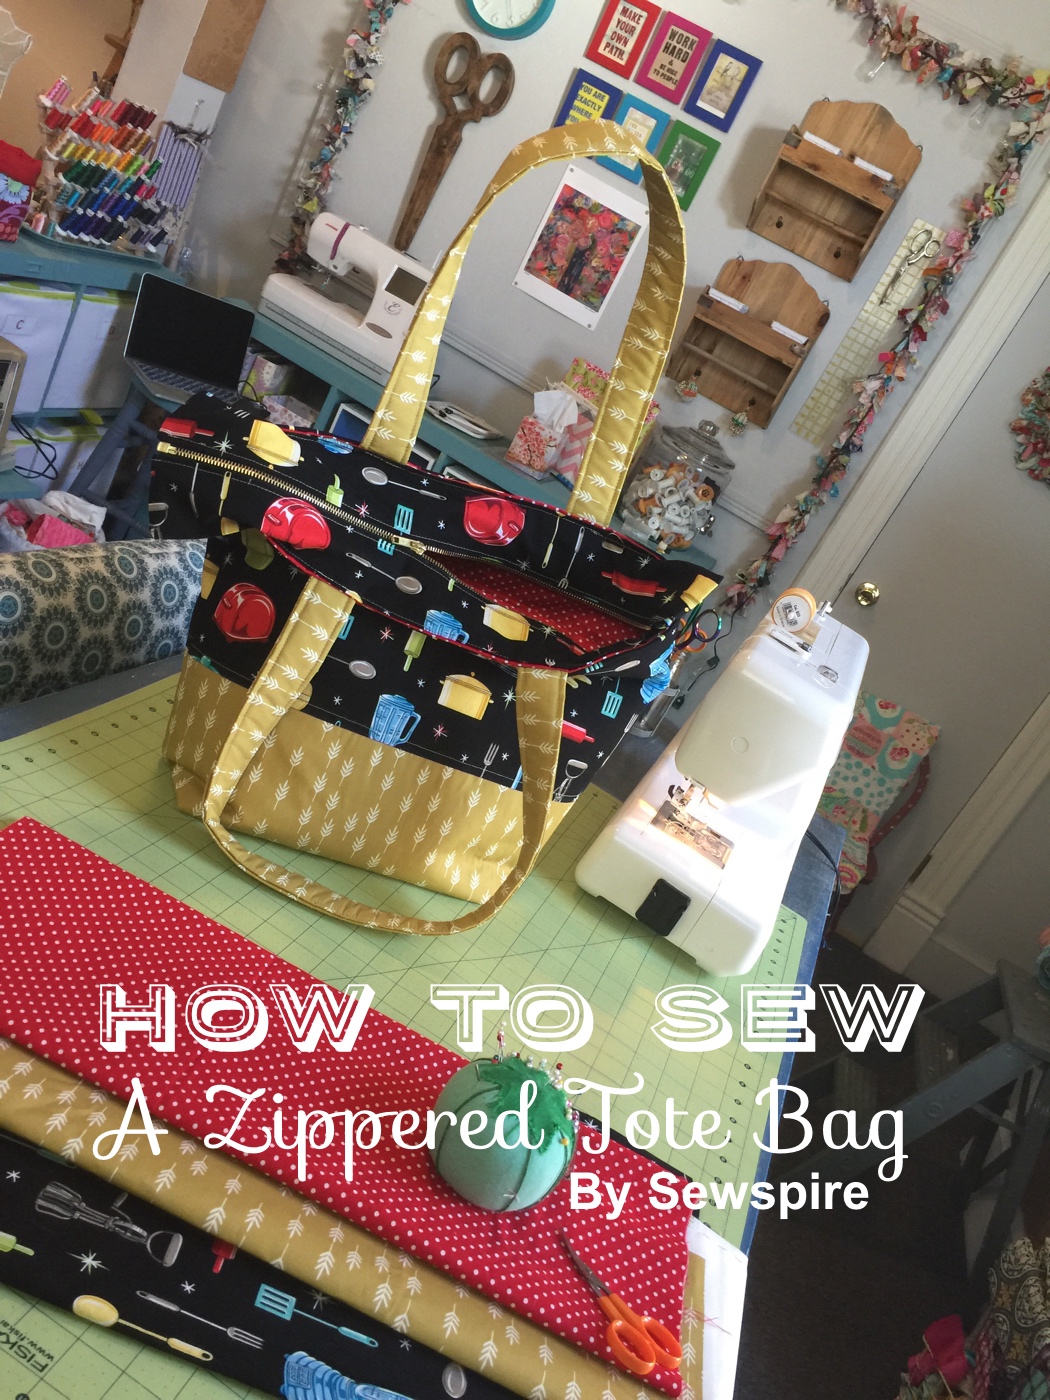 How to Sew A Retro Zippered Tote Bag by Sewspire